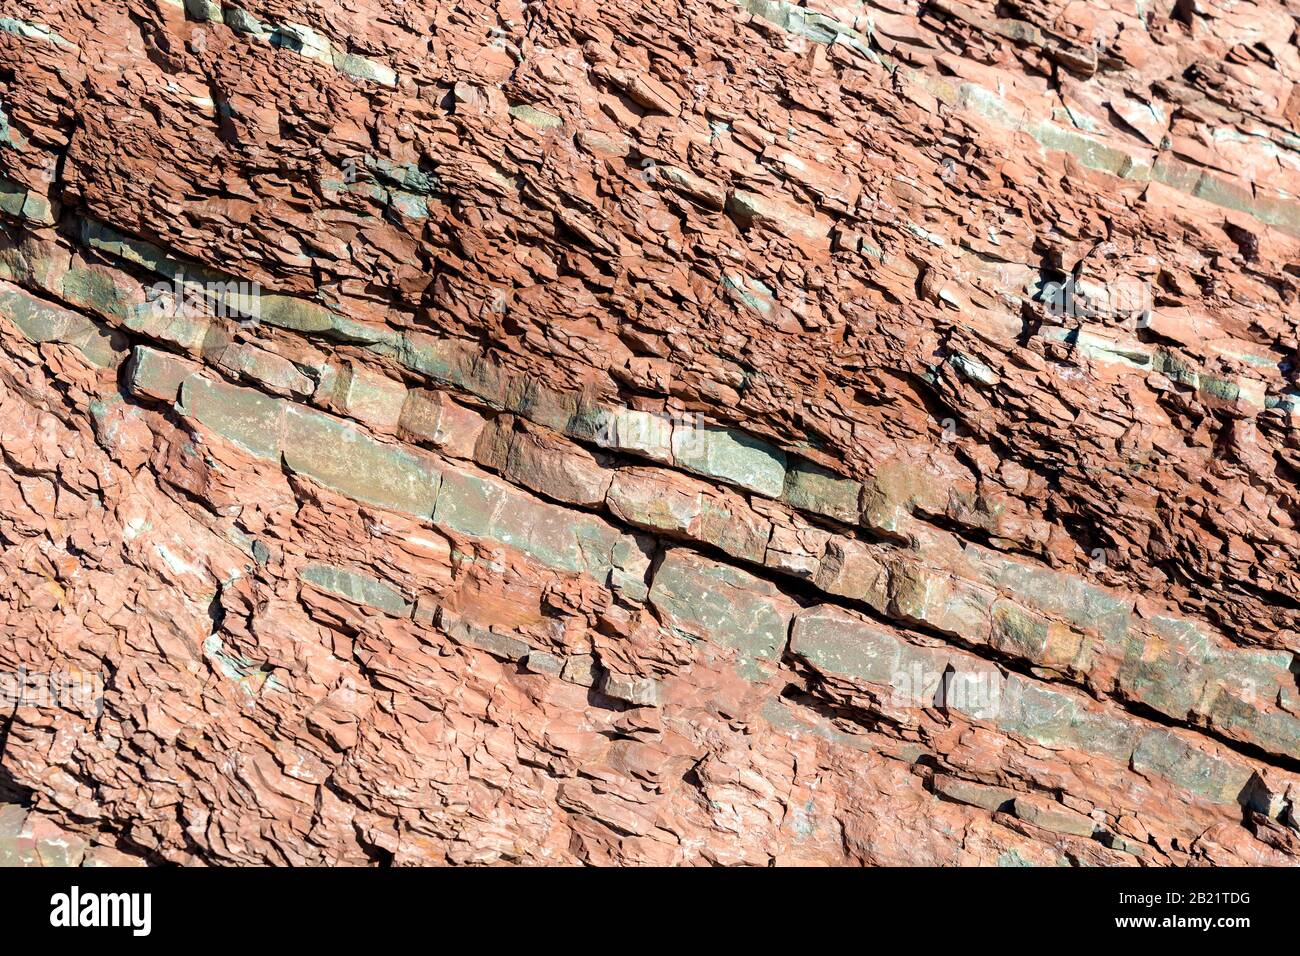 Layers of brown sedimentary rock in the side of a cliff. The rock is slanted at an angle. Closeup view. Stock Photo